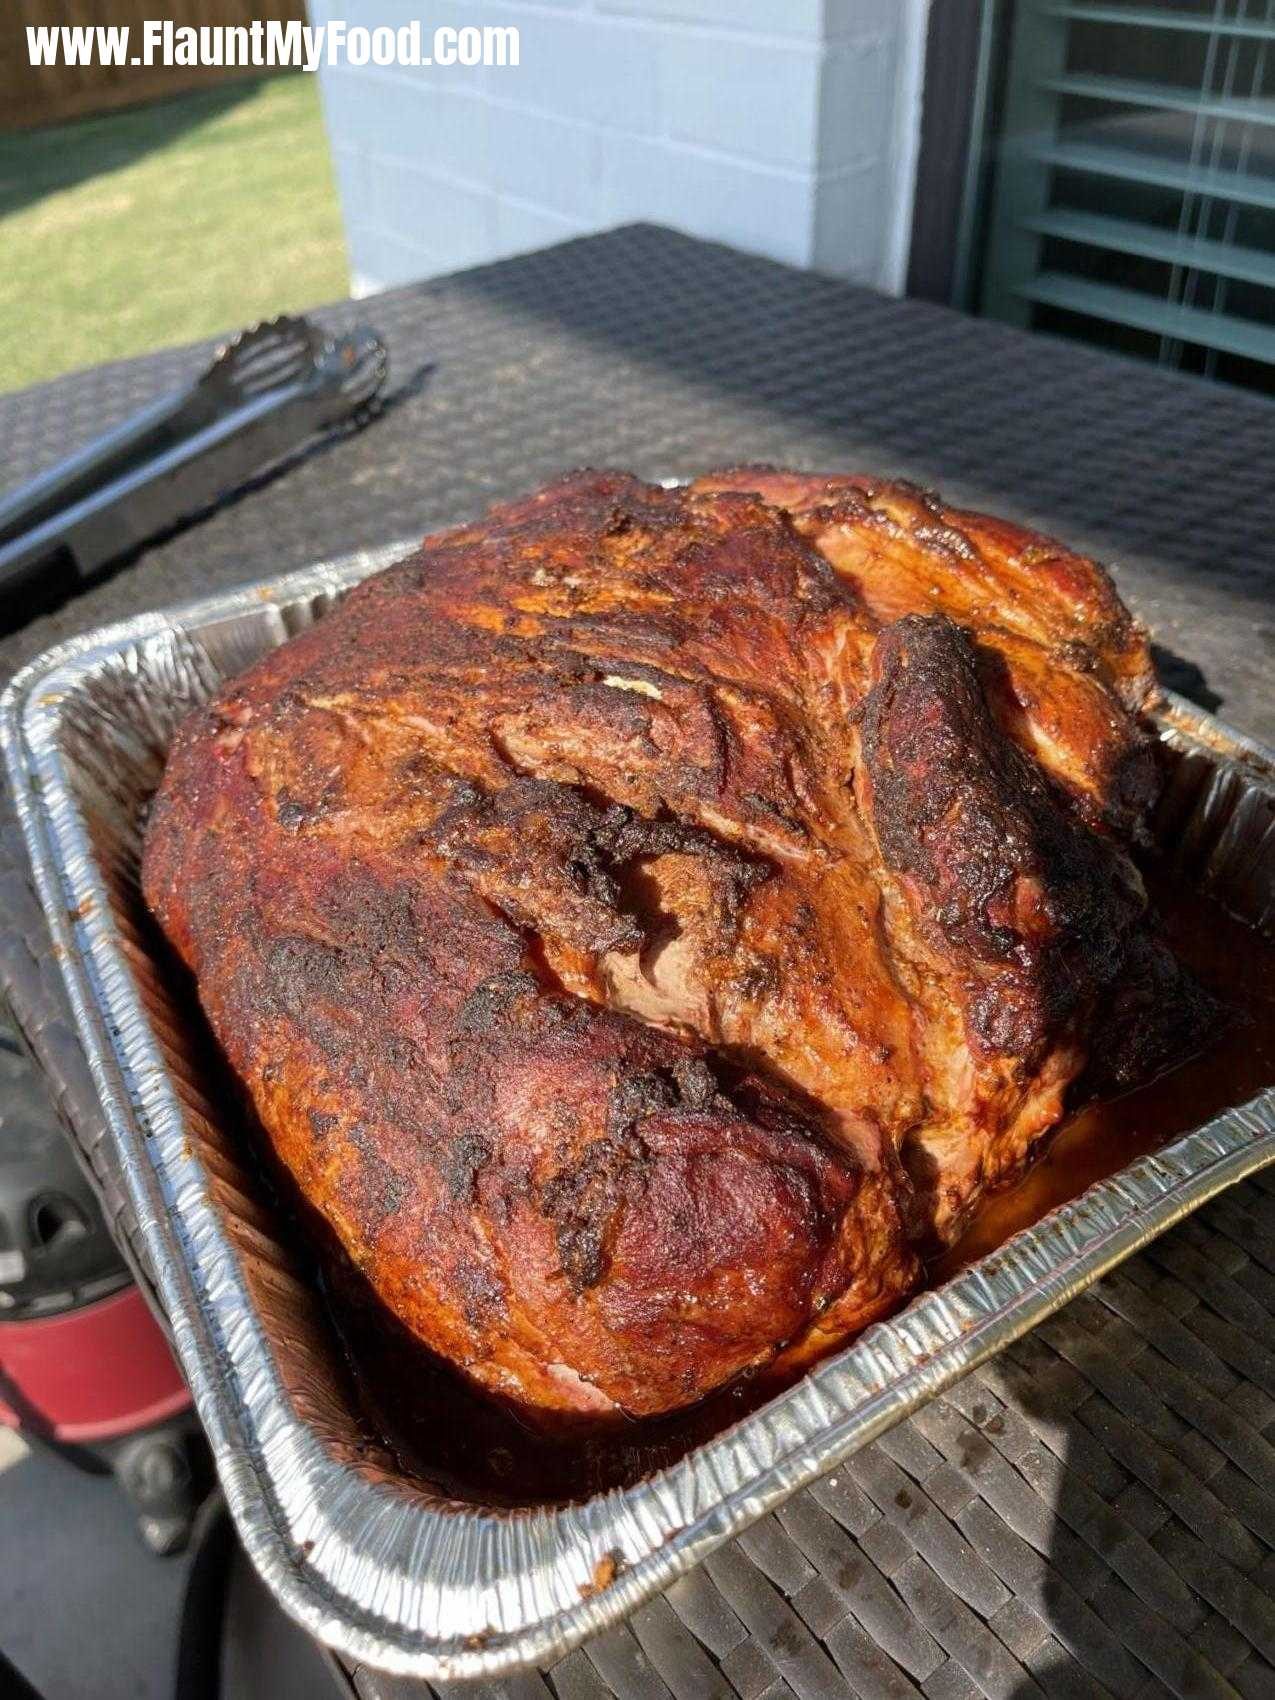 Master Smoker Bret - Some delicious roasted pork butts home grilled and roasted in a slow cooker by a master chef down in south Texas area.